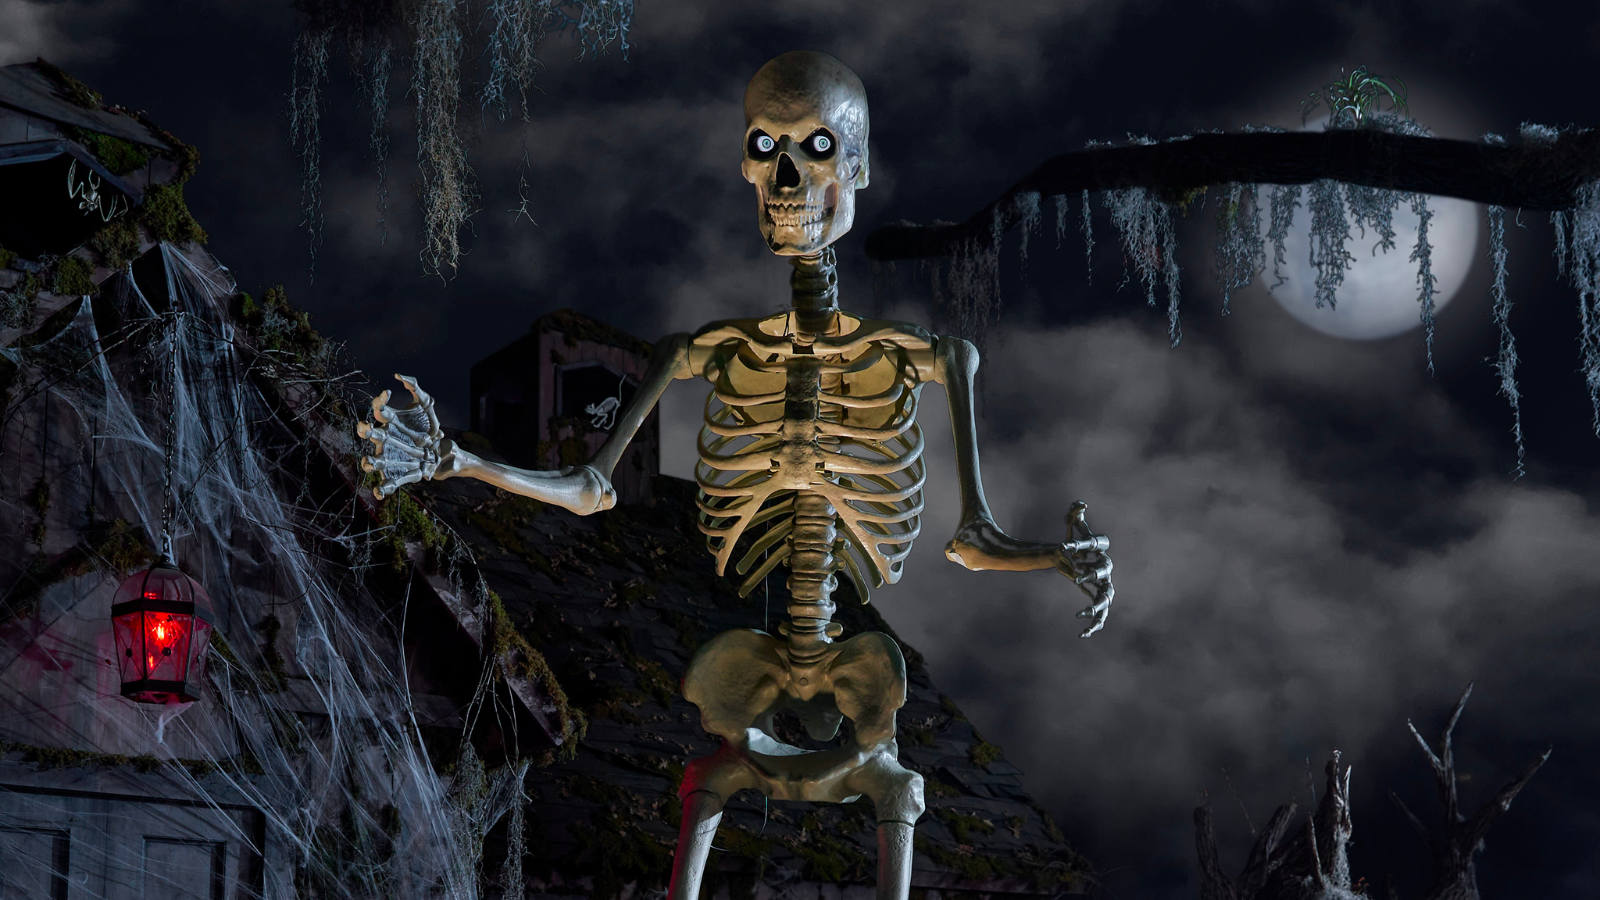 the 12-foot home depot skeleton in front of a dark, spooky background lit by a full moon